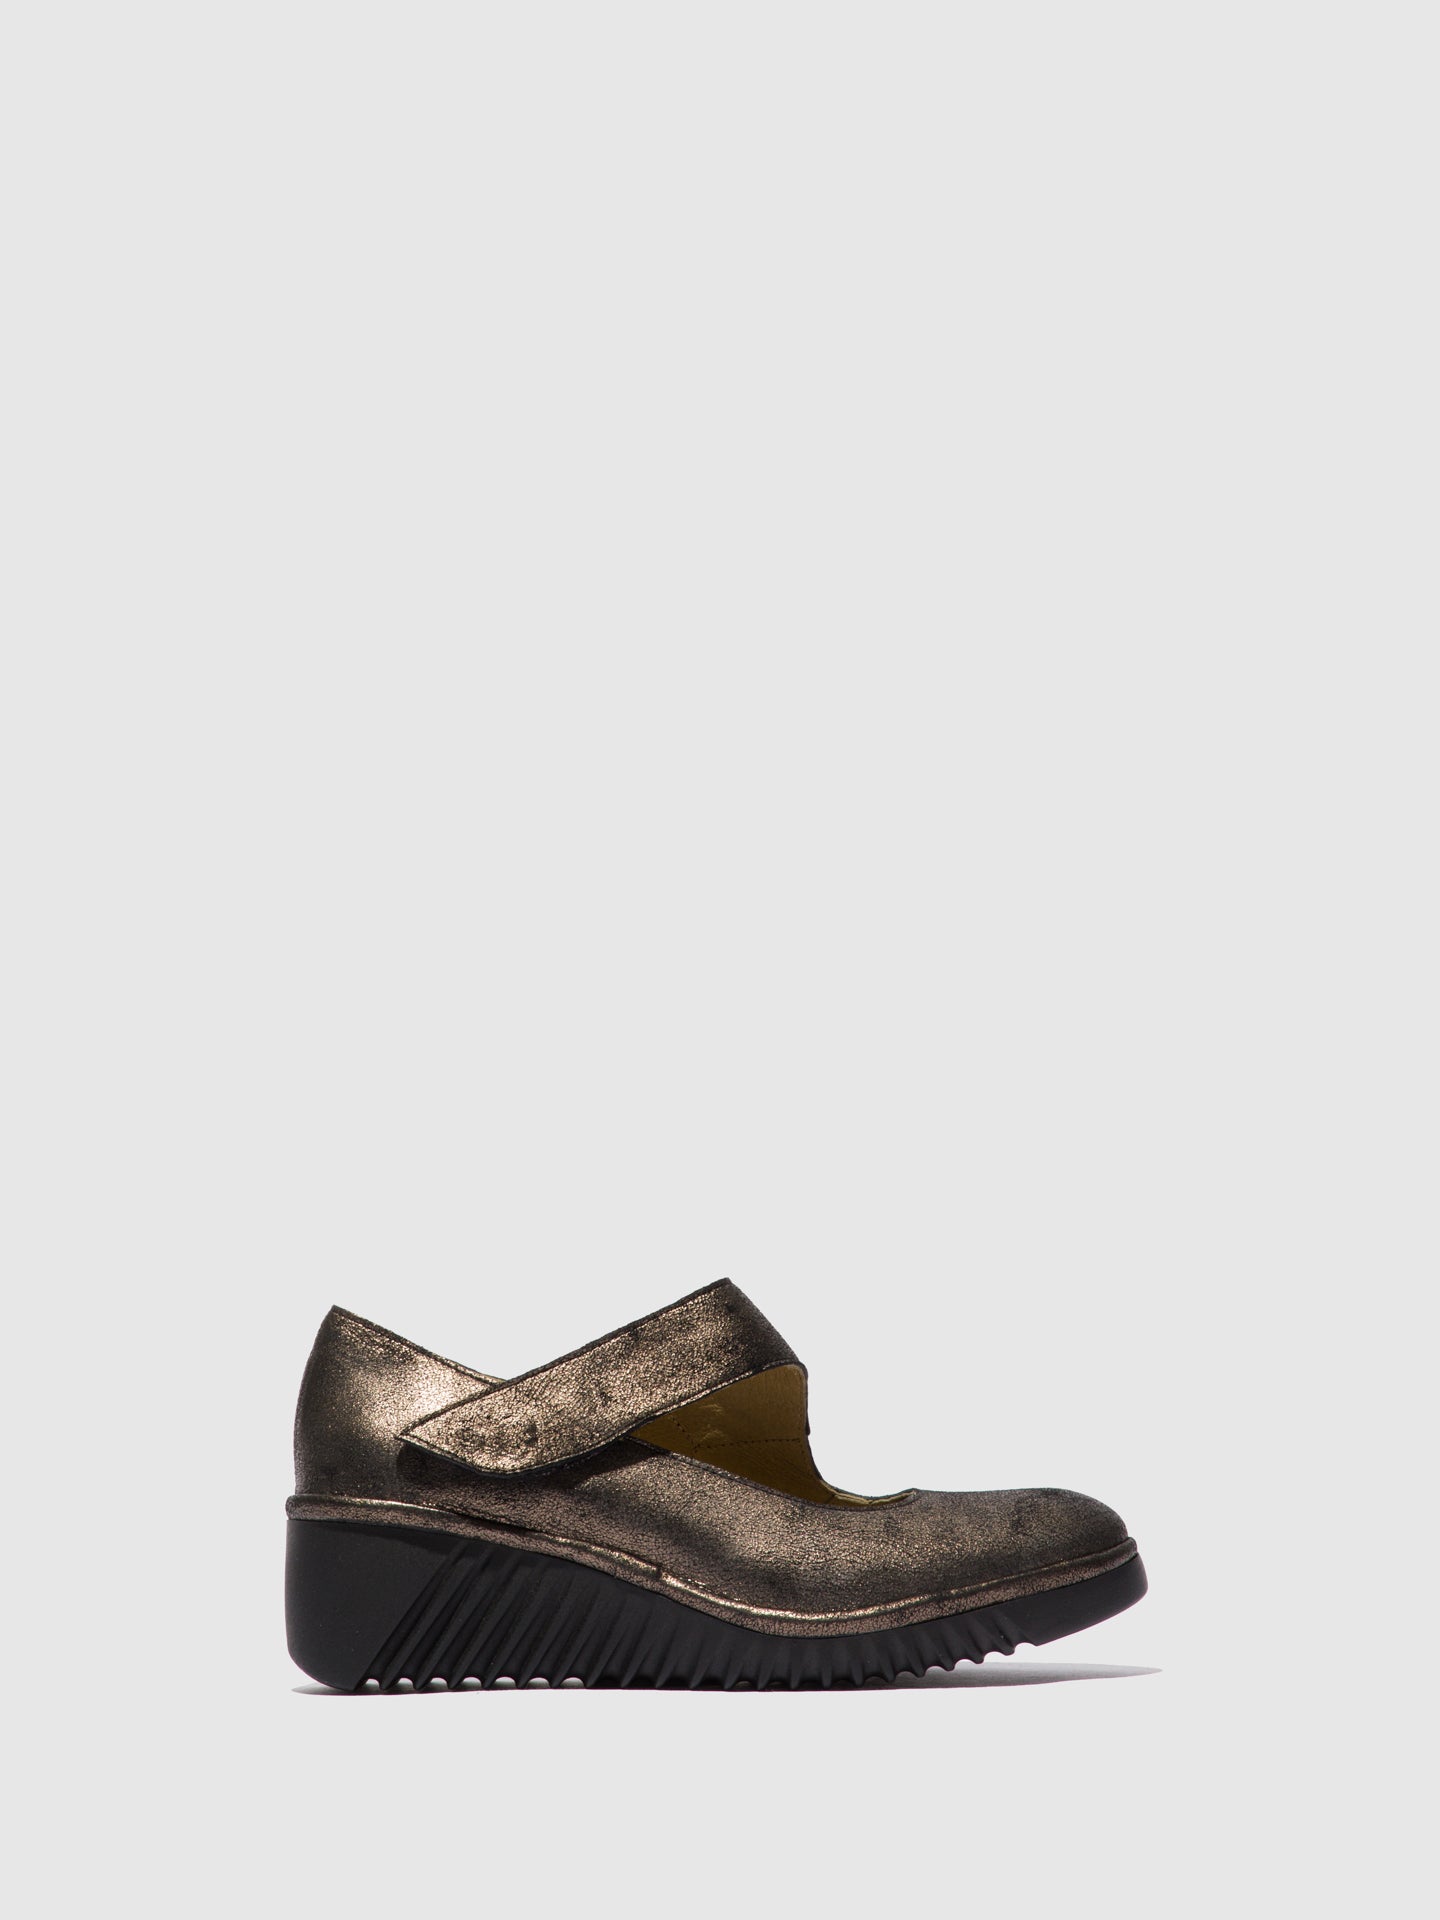 Fly London Sapatos Mary Jane LYKA350FLY COOL GRAPHITE